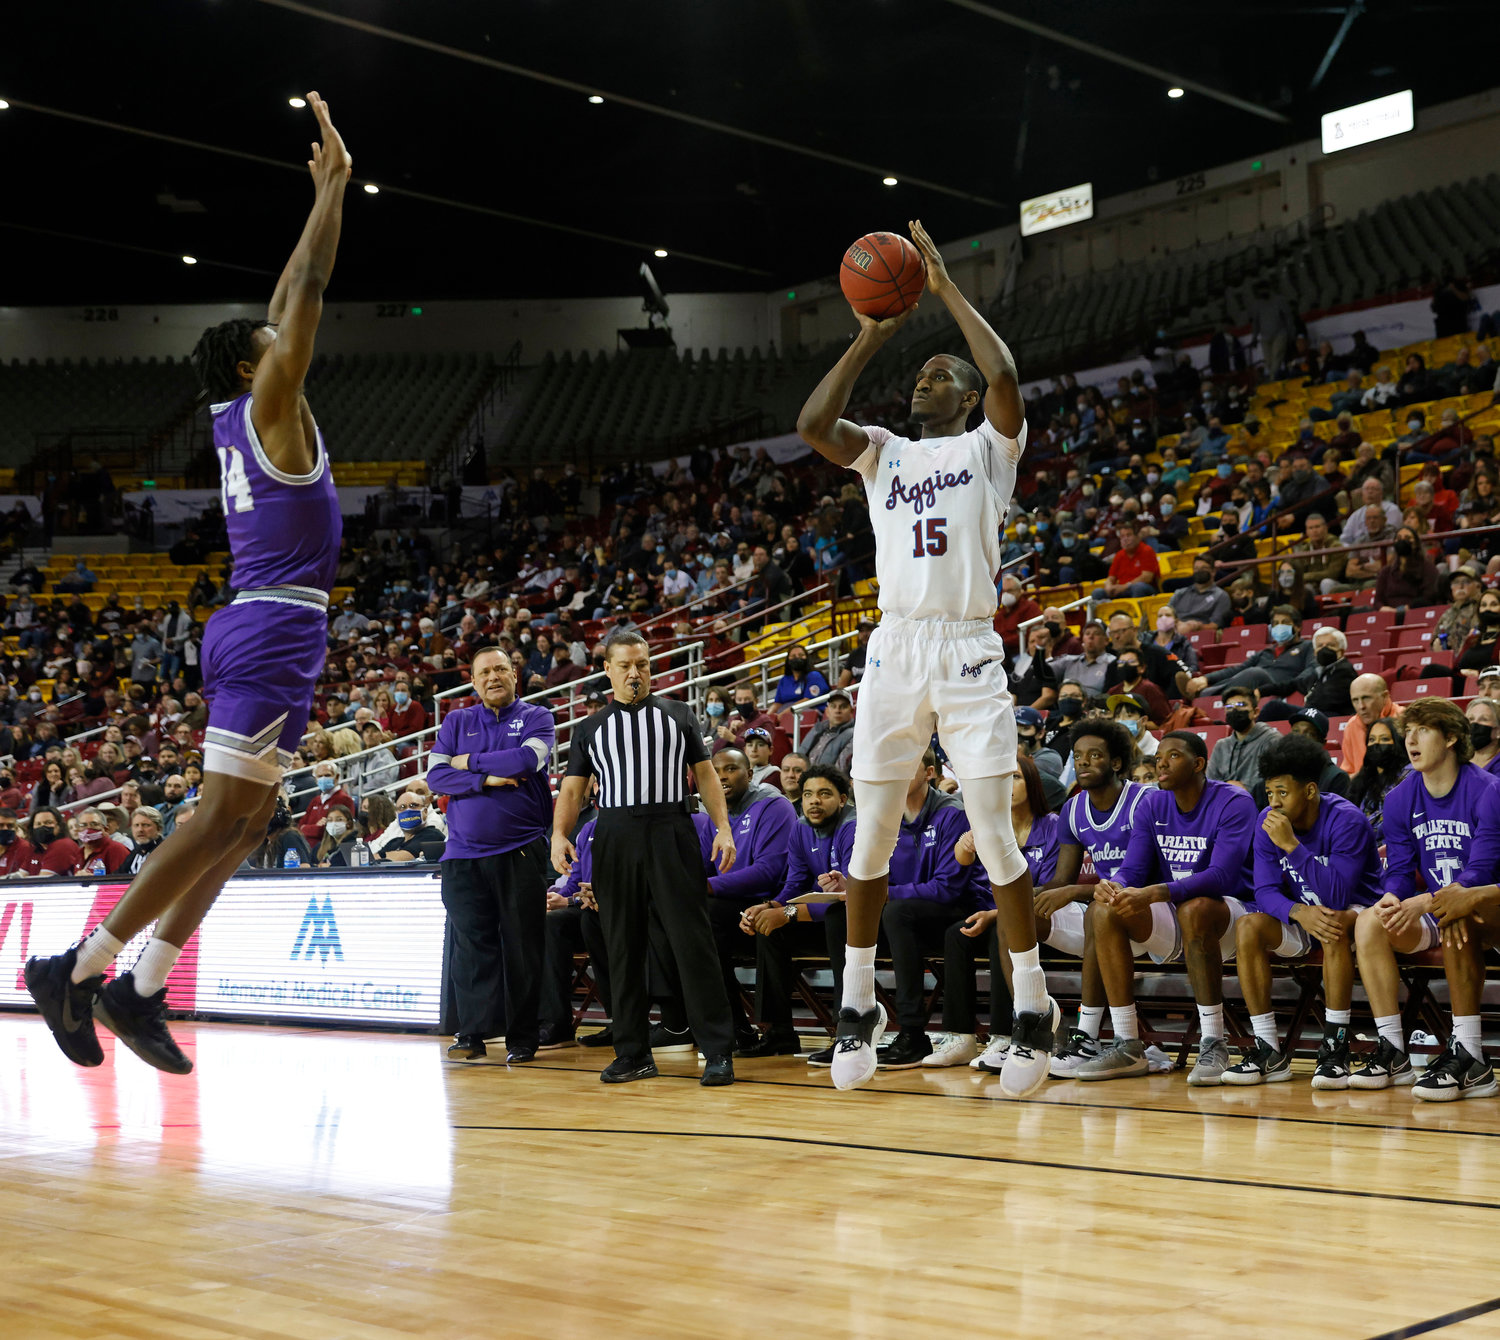 New Mexico State University sophomore Mike Peake takes a shot against Tarleton during the Aggies’ 73-57 win Jan. 13.